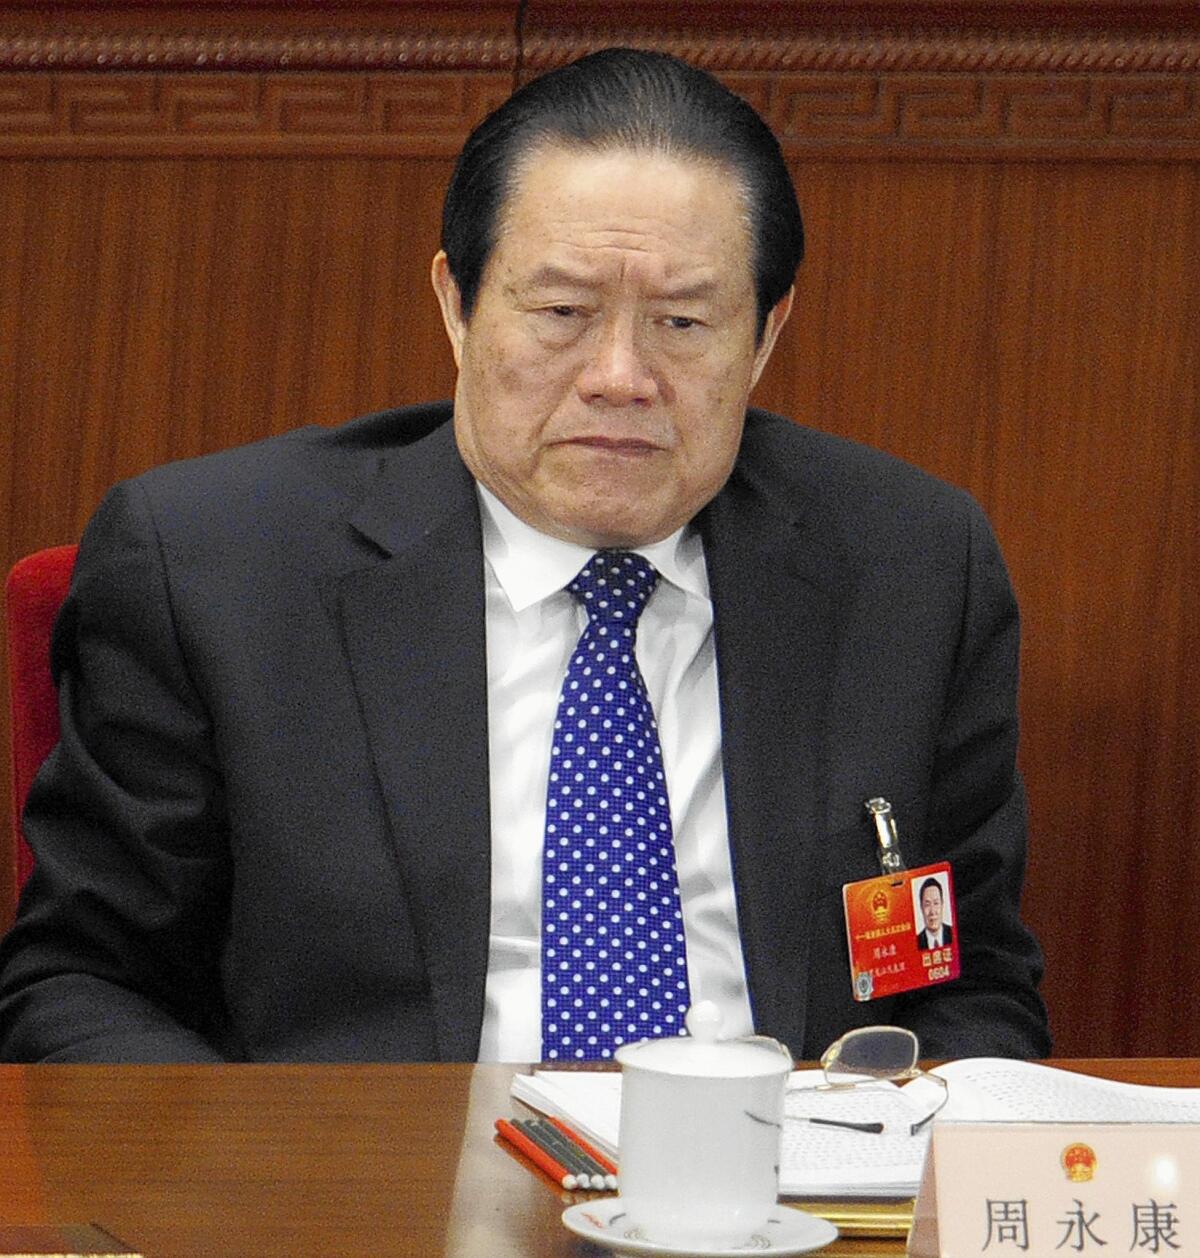 Zhou Yongkang, a former member of the Politburo Standing Committee, the highest body in the Chinese Communist Party, is believed to be the subject of a corruption probe. But news accounts in China have studiously avoided mentioning his name.